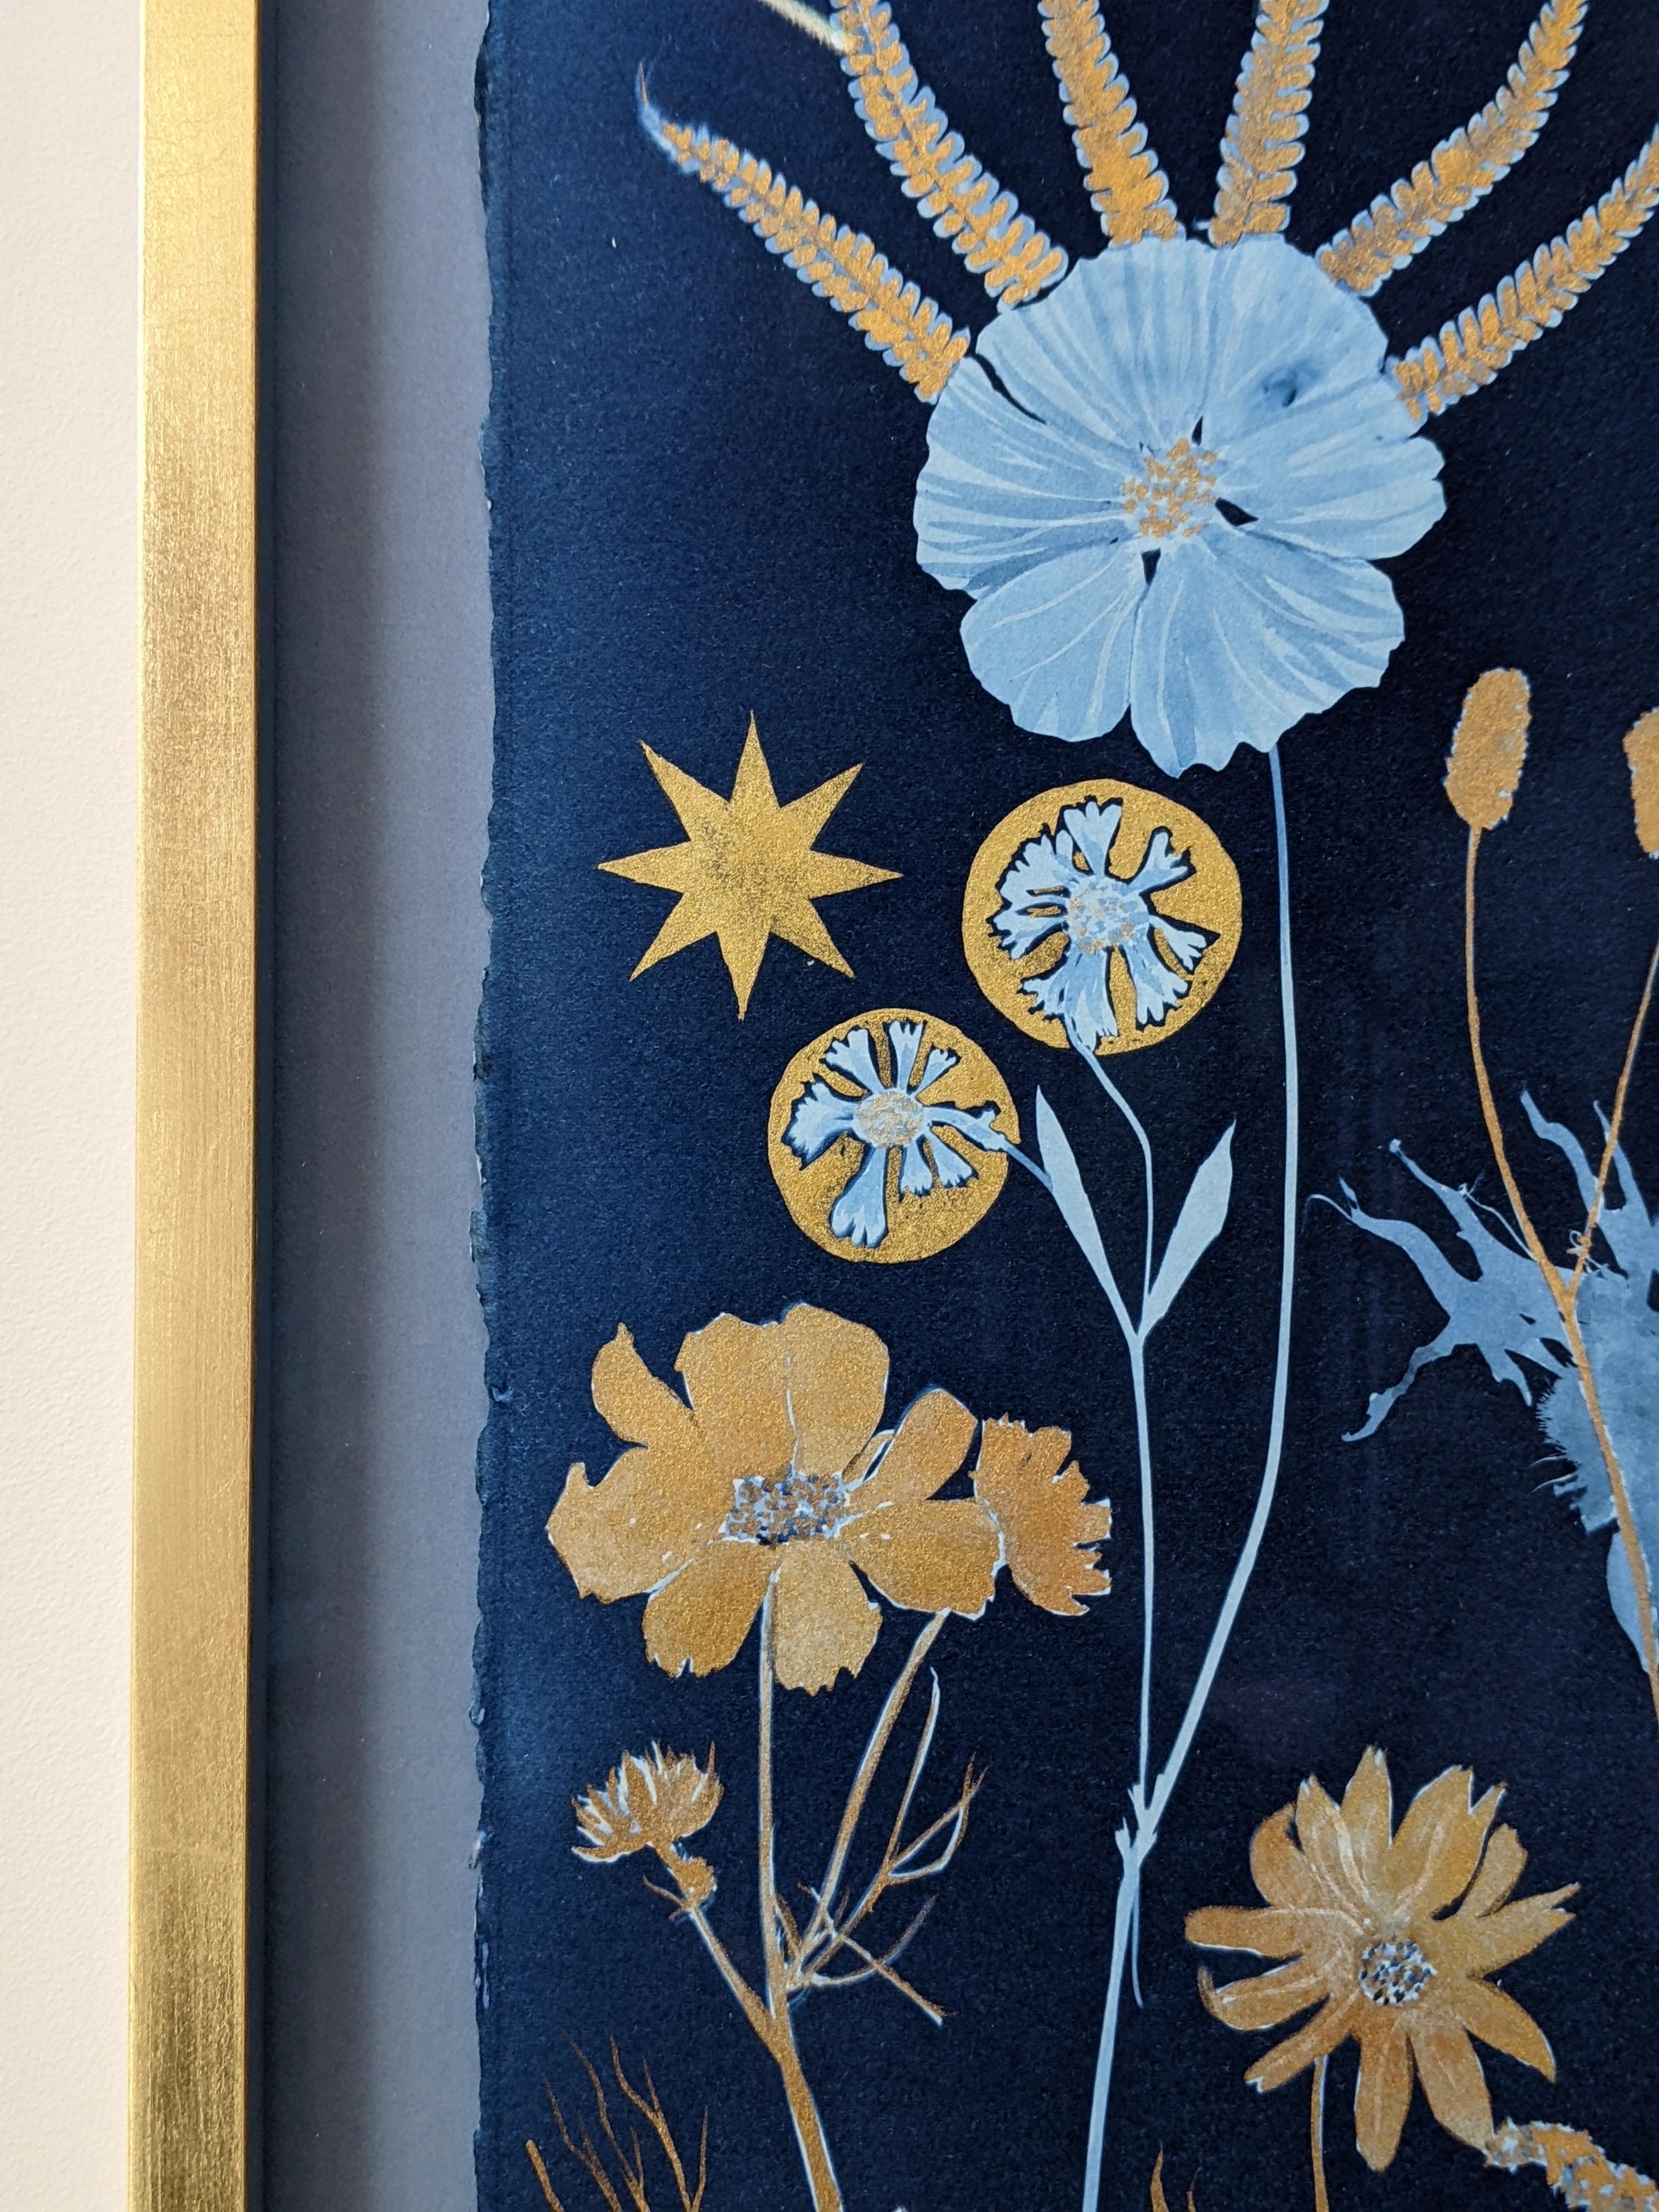 Meticulously detailed flowers, including cosmos and Rose of Sharon are depicted in shades of pale blue with luminous gold details against a deep, indigo blue background with stars and a geometric tile floor pattern on the lower part of the